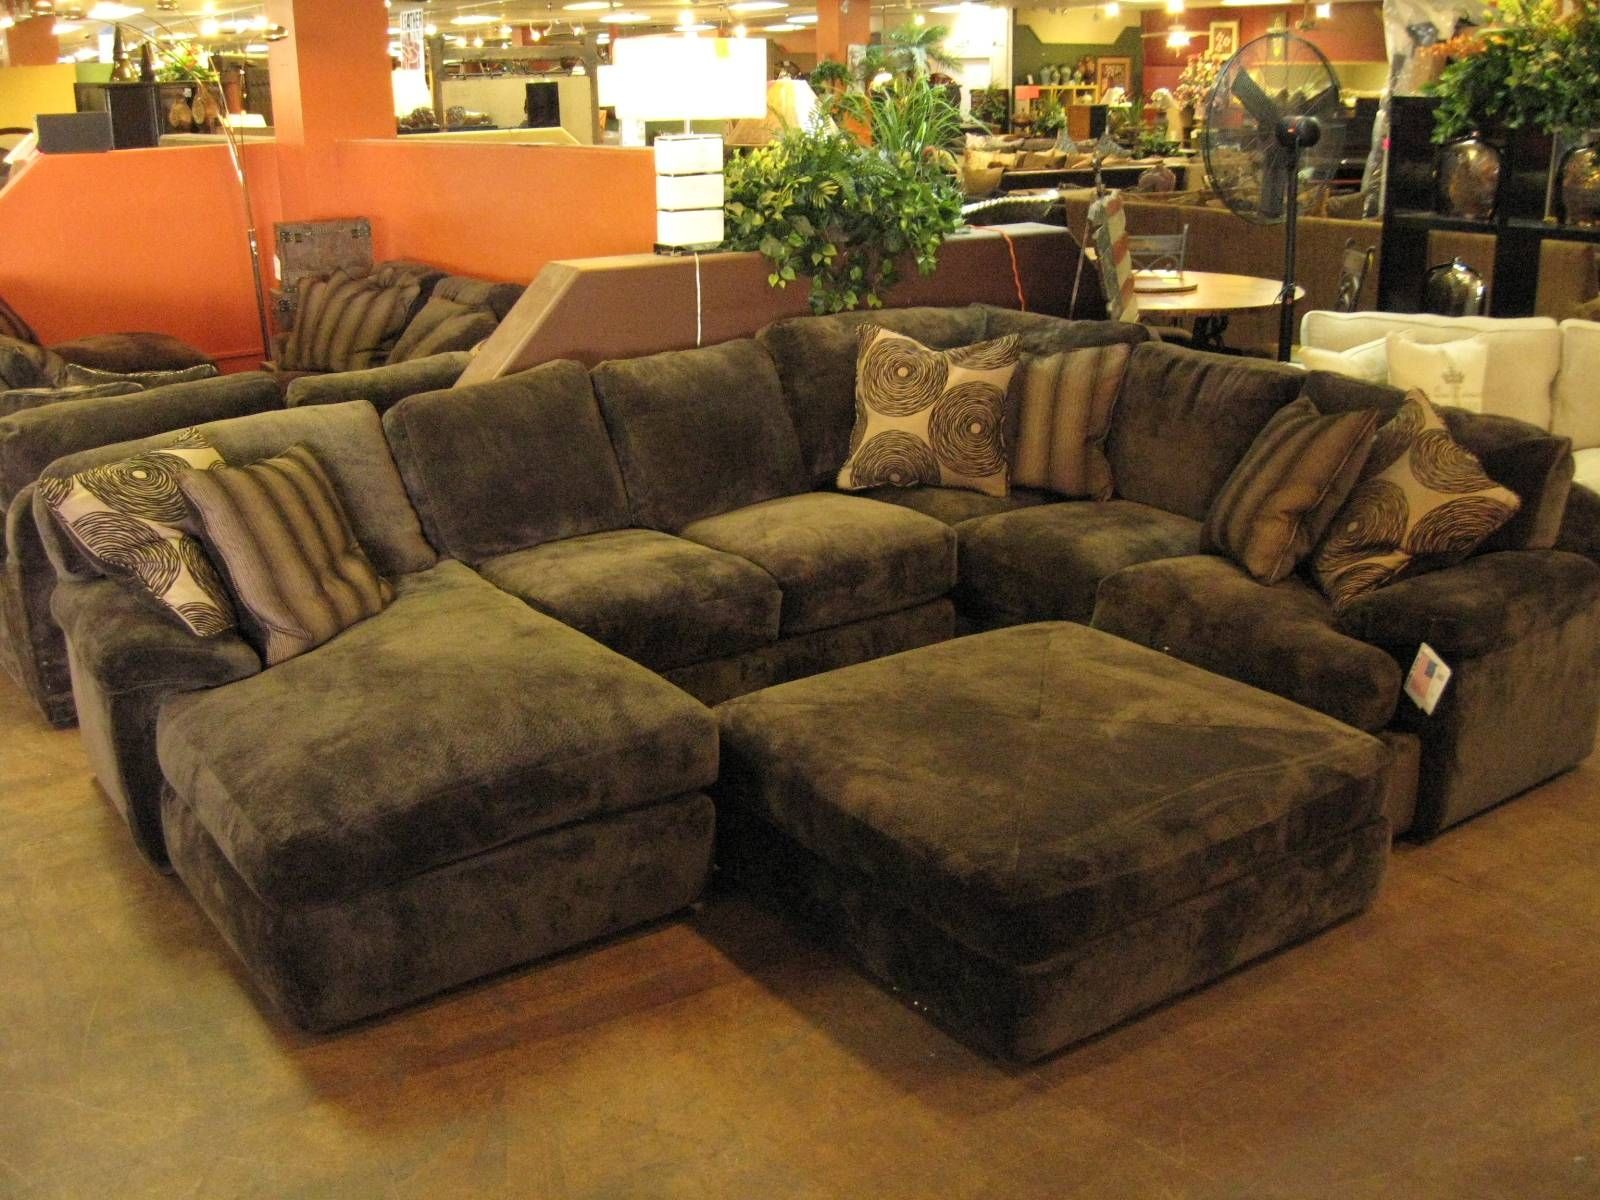 Sofas Center : Excellent Down Sectional Sofa Images Concept With Regarding Goose Down Sectional Sofas (View 10 of 15)